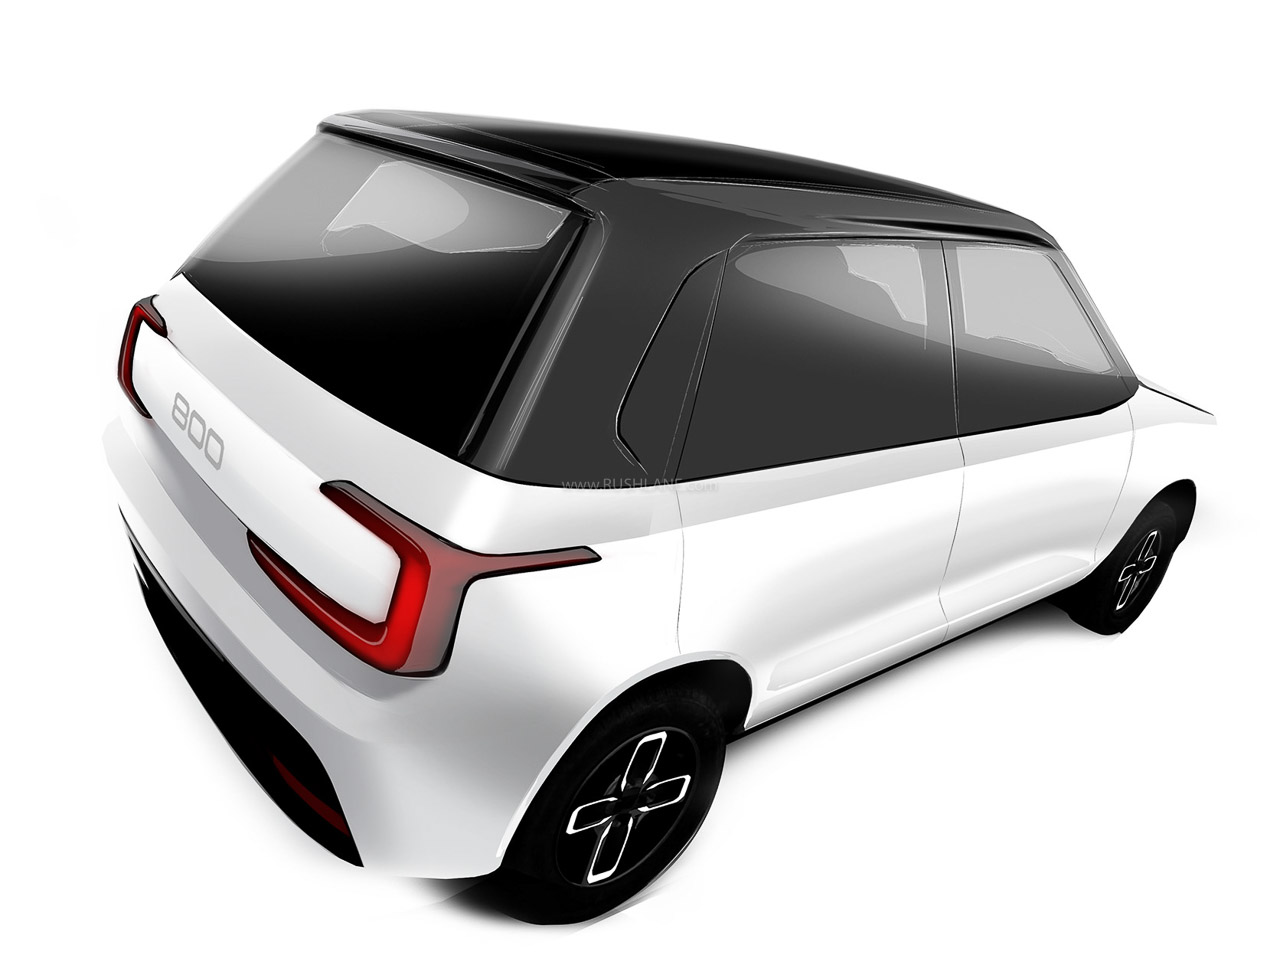 New Maruti Electric Car Is A Modern Day Version Of The Iconic Maruti 800